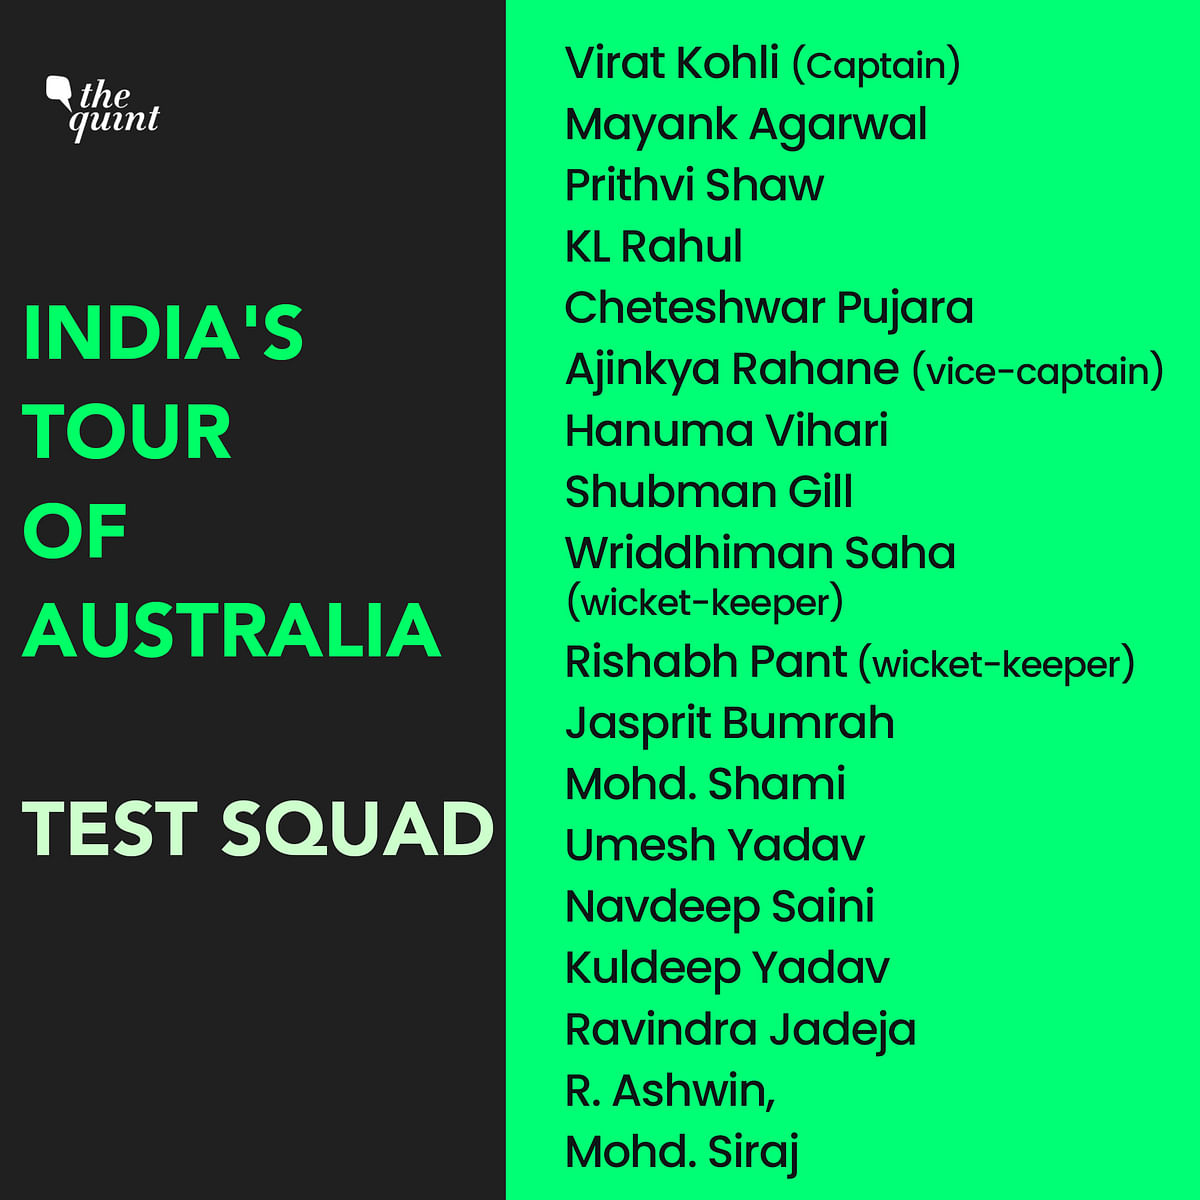 KL Rahul has been named India’s vice-captain in the limited-overs teams, in the absence of injured Rohit Sharma.